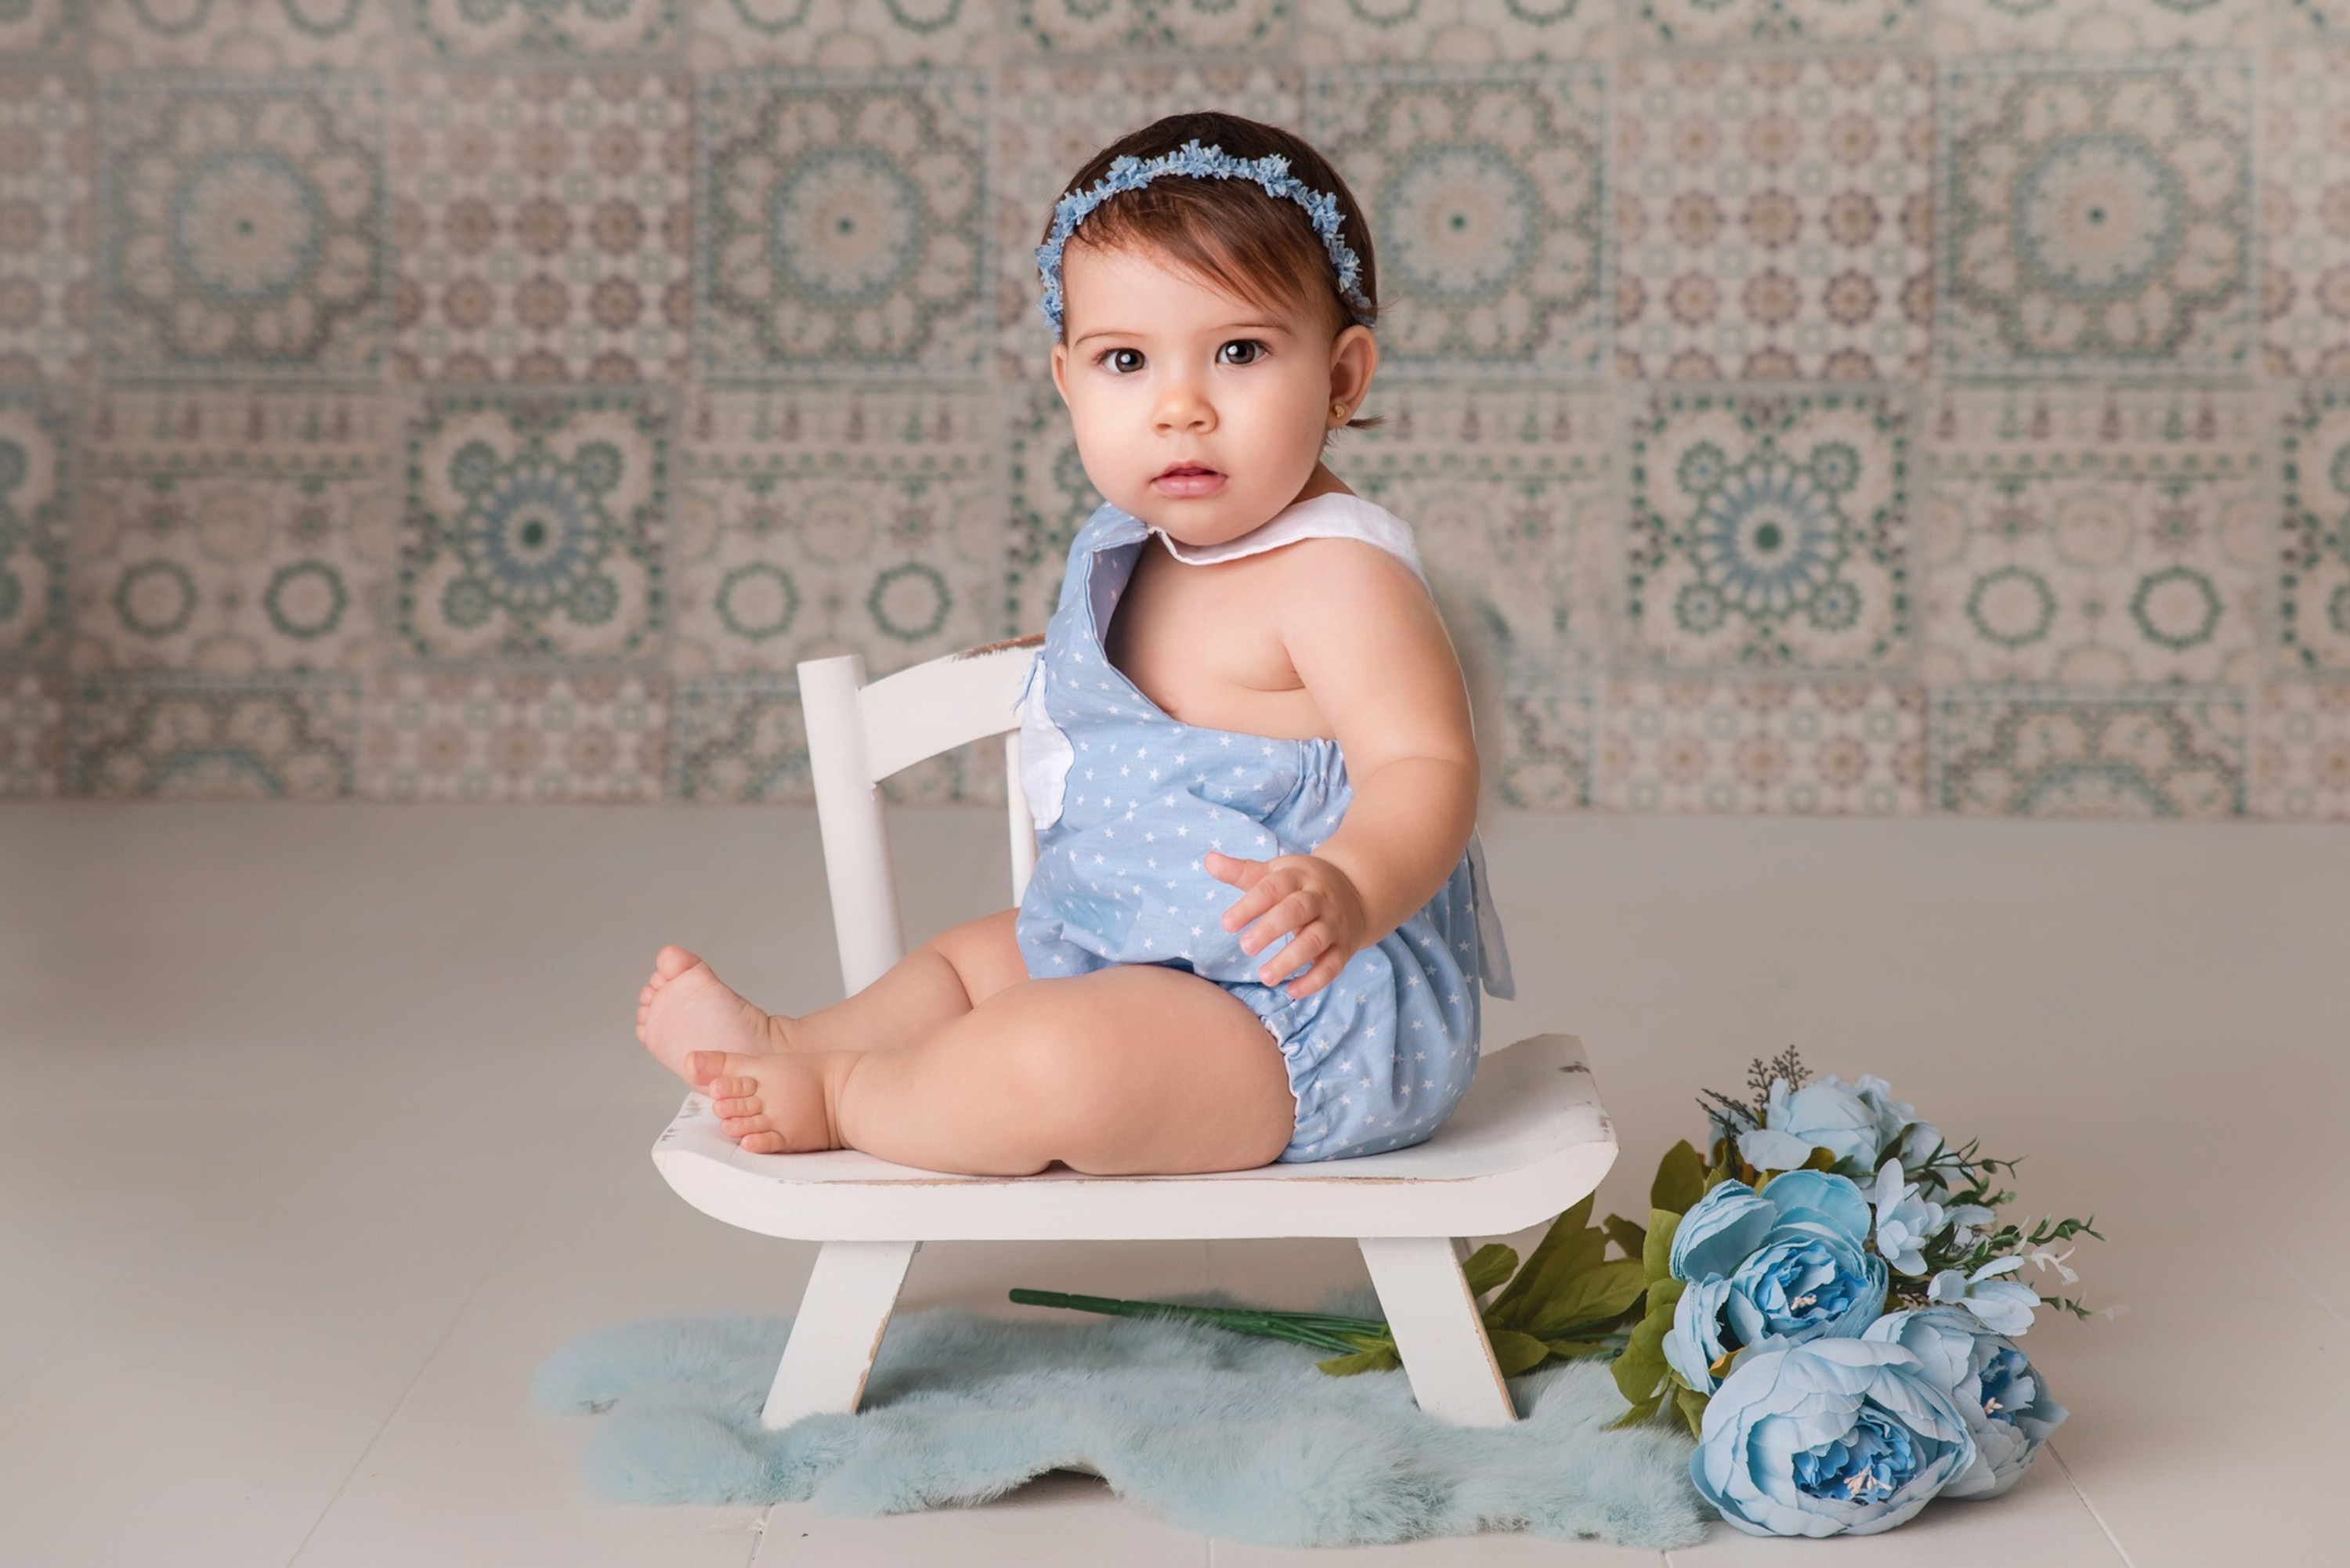 Newborn Photography Set: Wooden Cradles For Sale, Chair, Posing Seats,  Sofa, And Accessories For Baby Bed And Poets L231016 From Koreyosh, $6.19 |  DHgate.Com